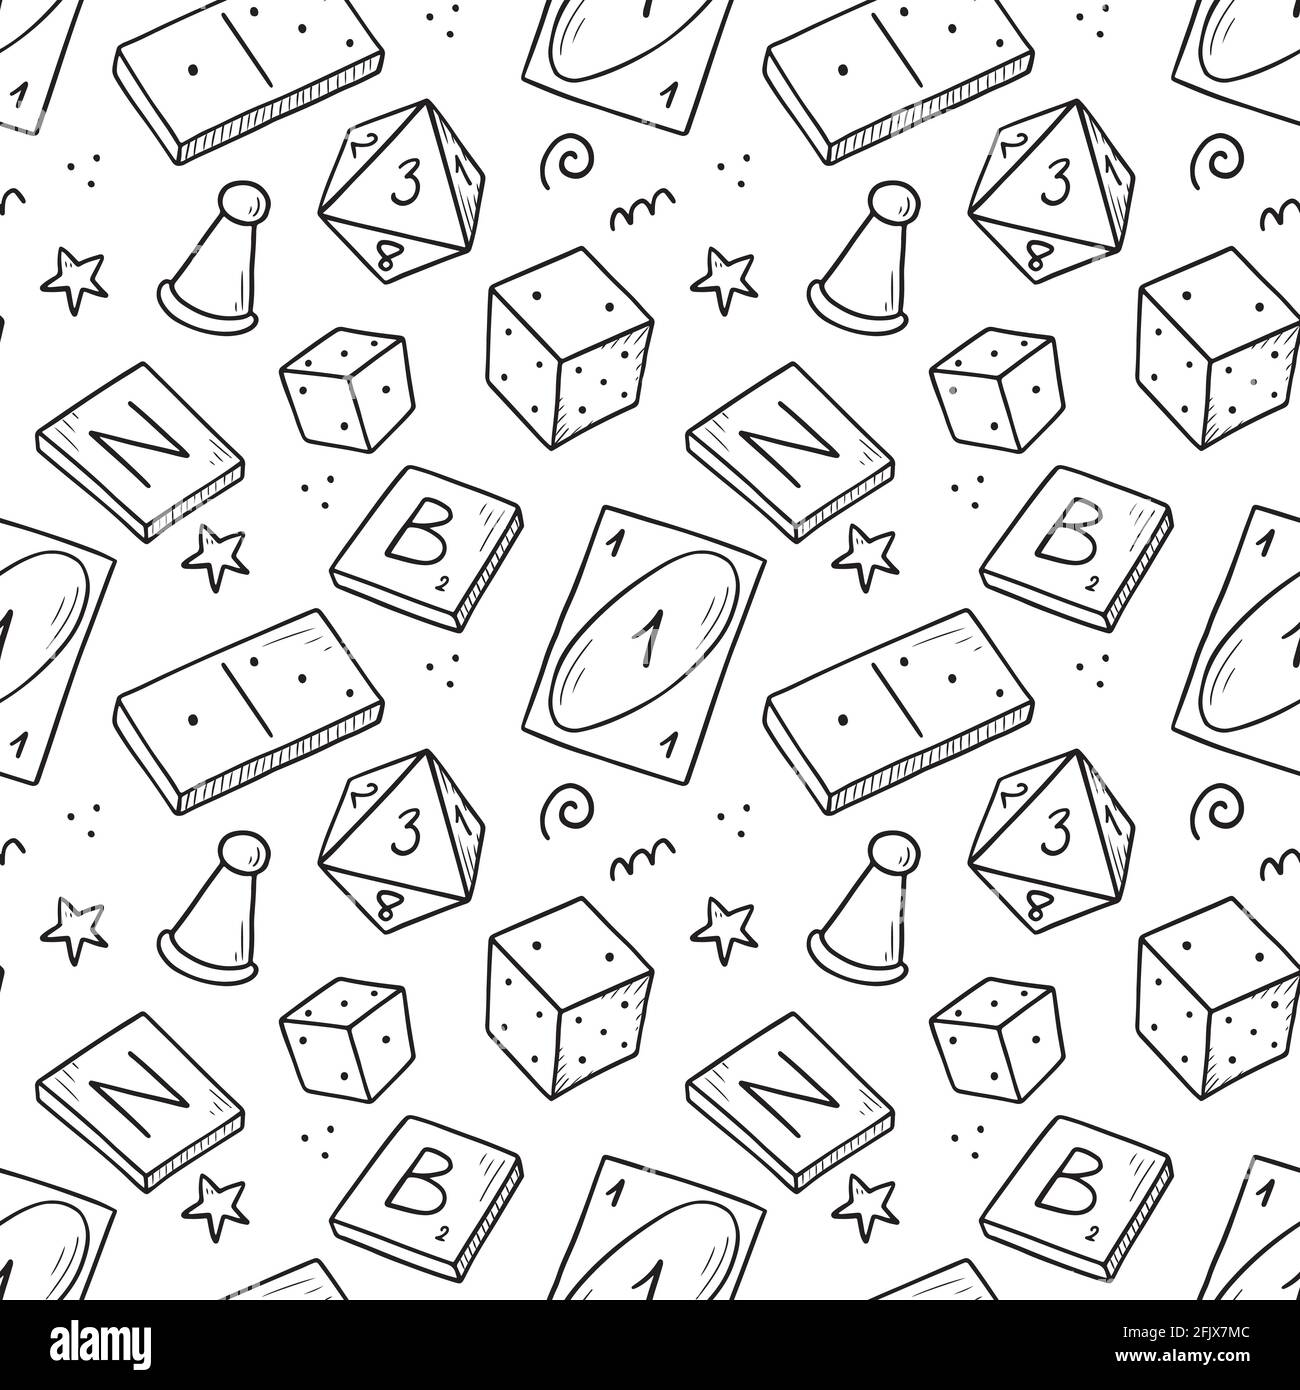 Hand drawn seamless pattern of board game element, cards, chess, hourglass, chips, dice, dominoes. Doodle sketch style. Isolated vector illustration for for board game shop, store. Stock Vector